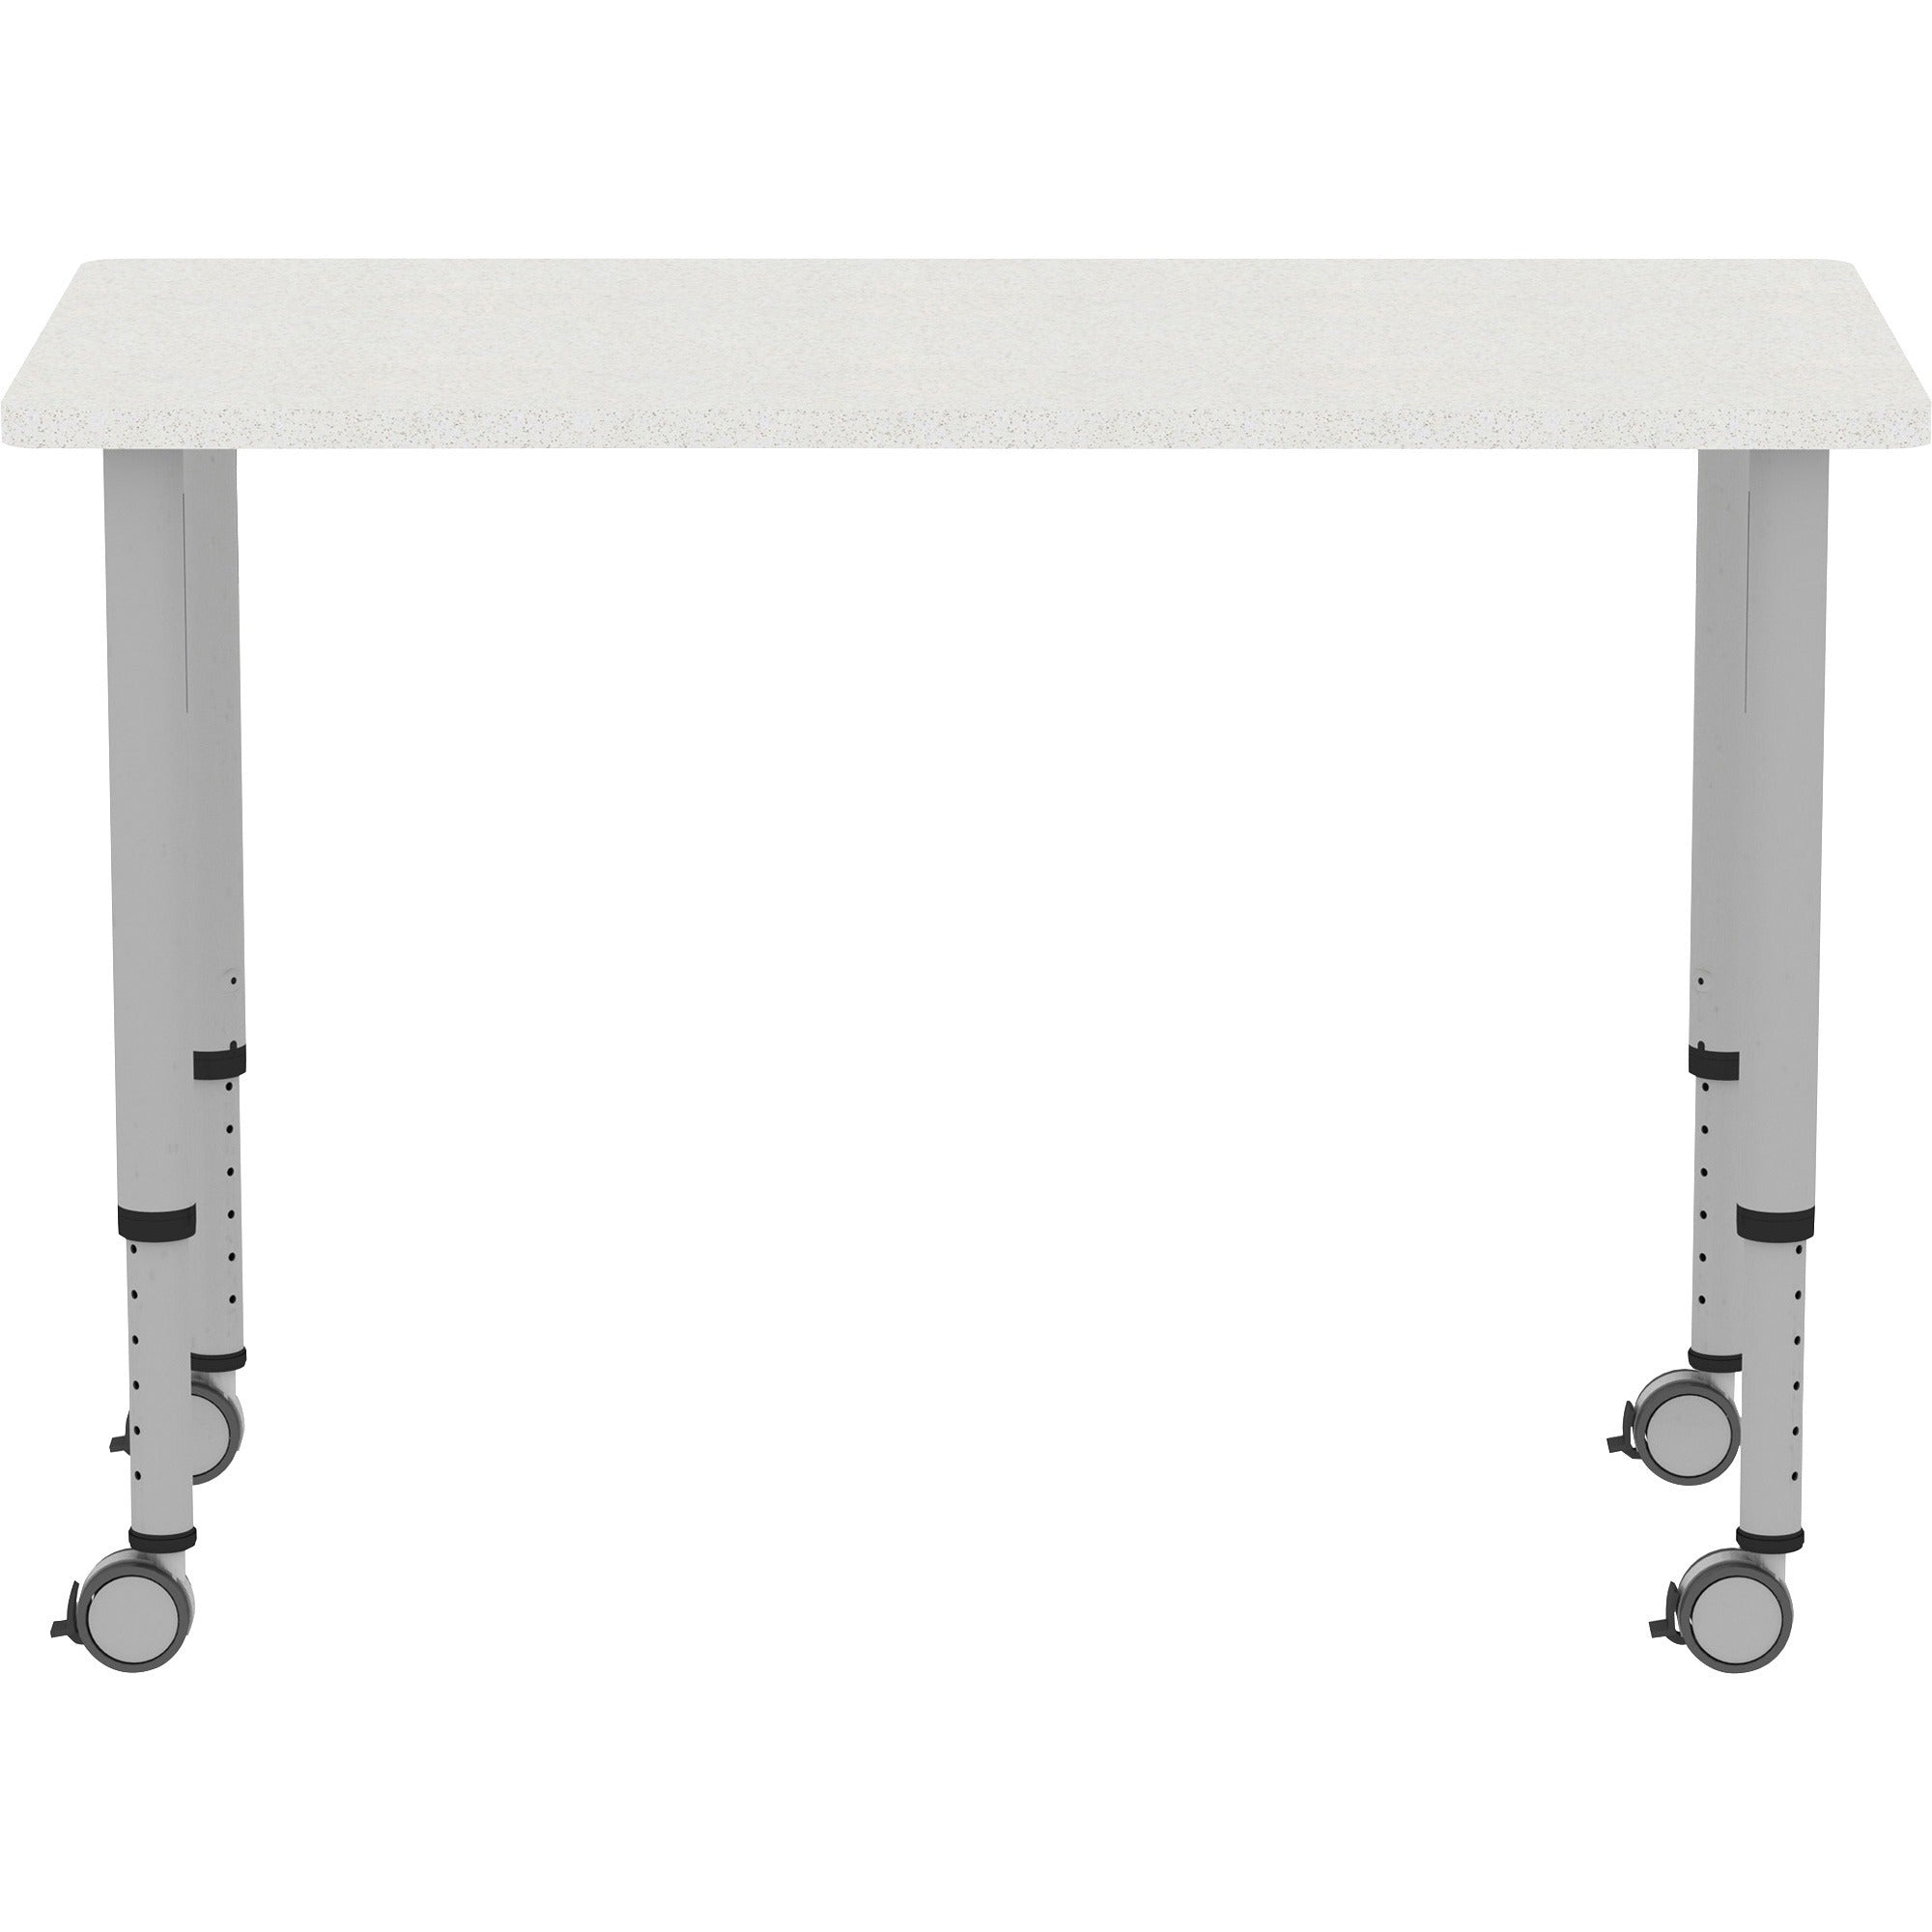 lorell-attune-height-adjustable-multipurpose-rectangular-table-for-table-toprectangle-top-adjustable-height-2662-to-3362-adjustment-x-48-table-top-width-x-2362-table-top-depth-3362-height-assembly-required-laminated-gray-lam_llr69581 - 5